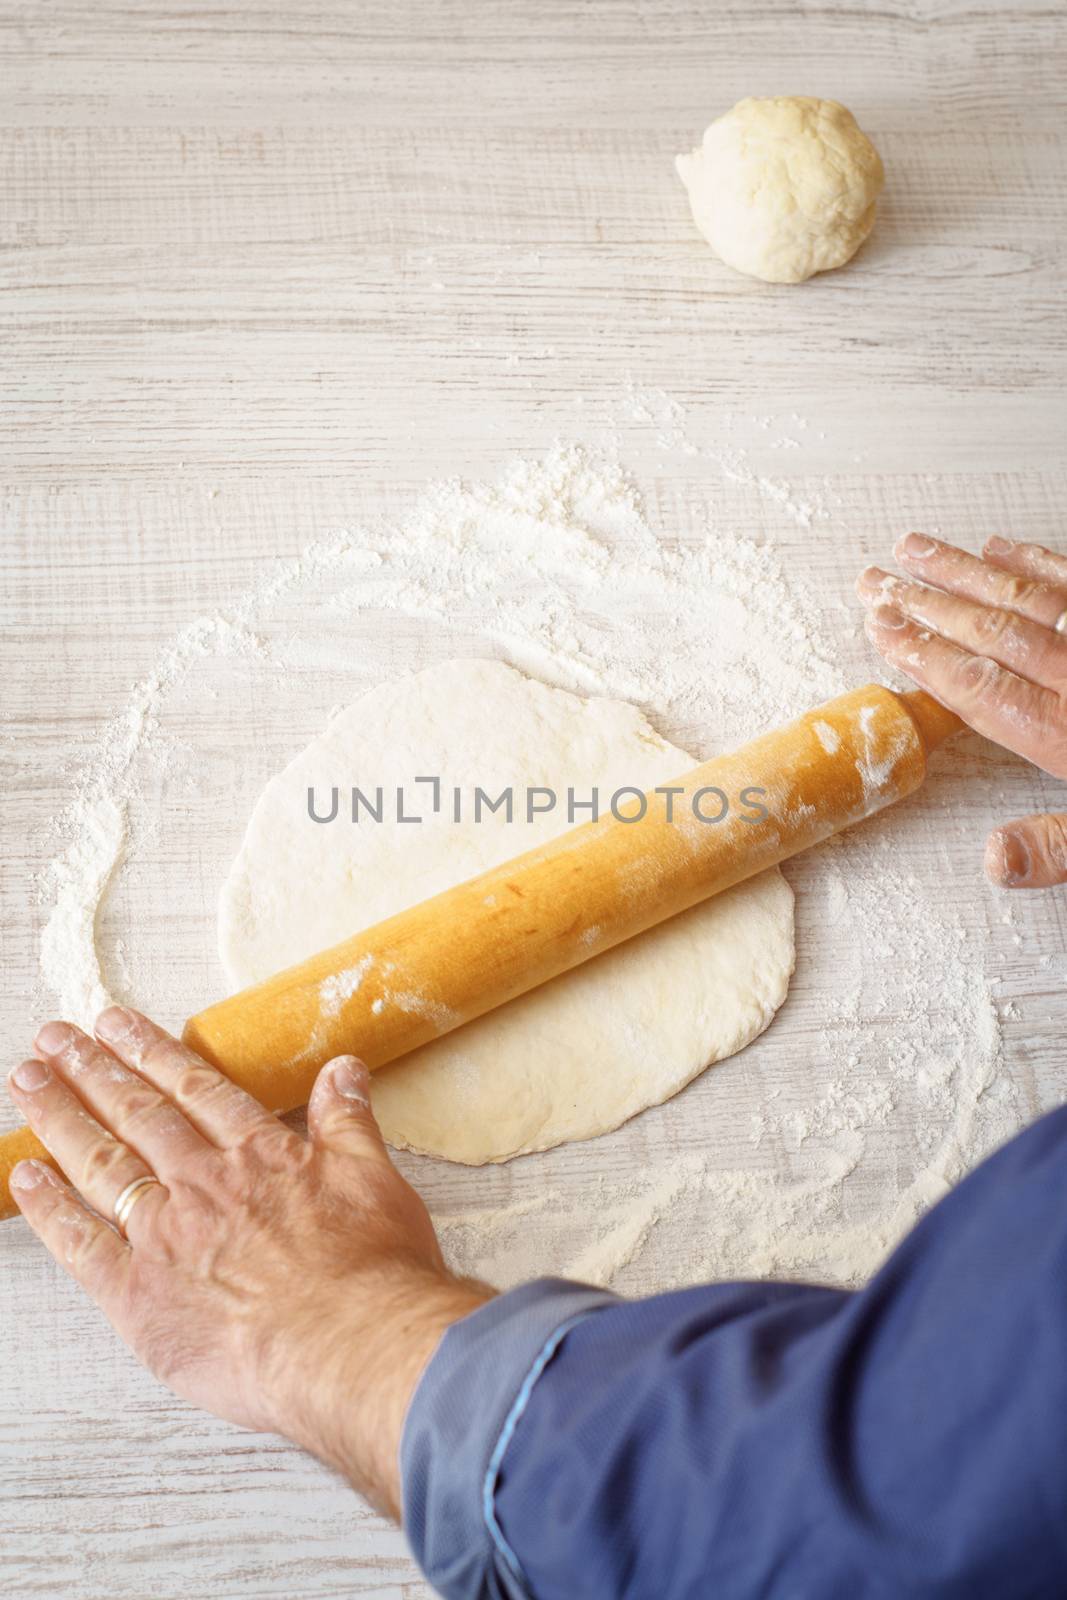 Man rolling dough on the white table vertical